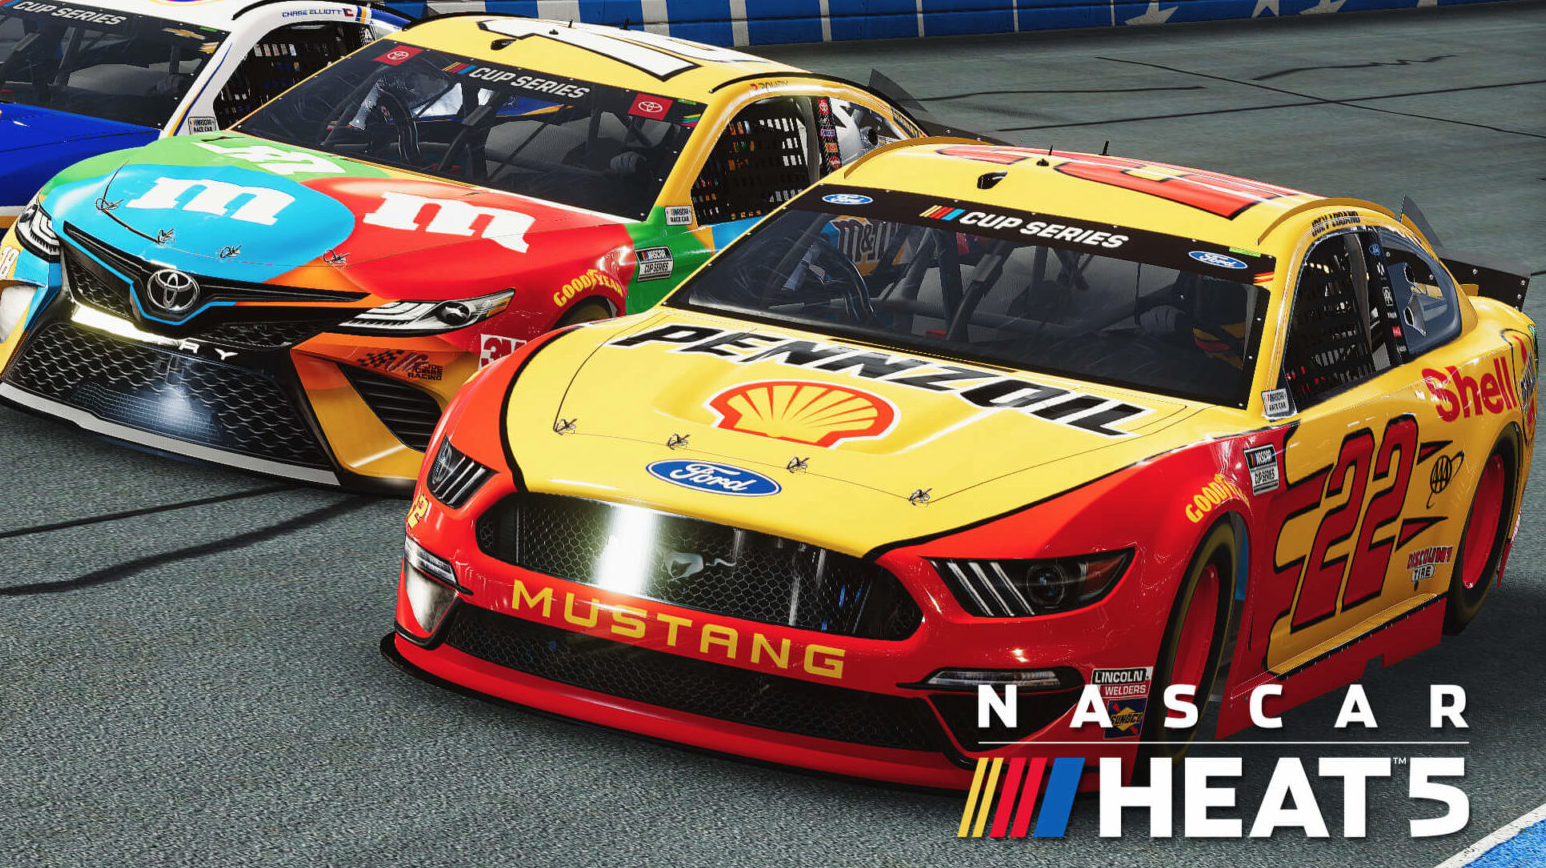 NASCAR Heat 5 set for July 7 and 10 release